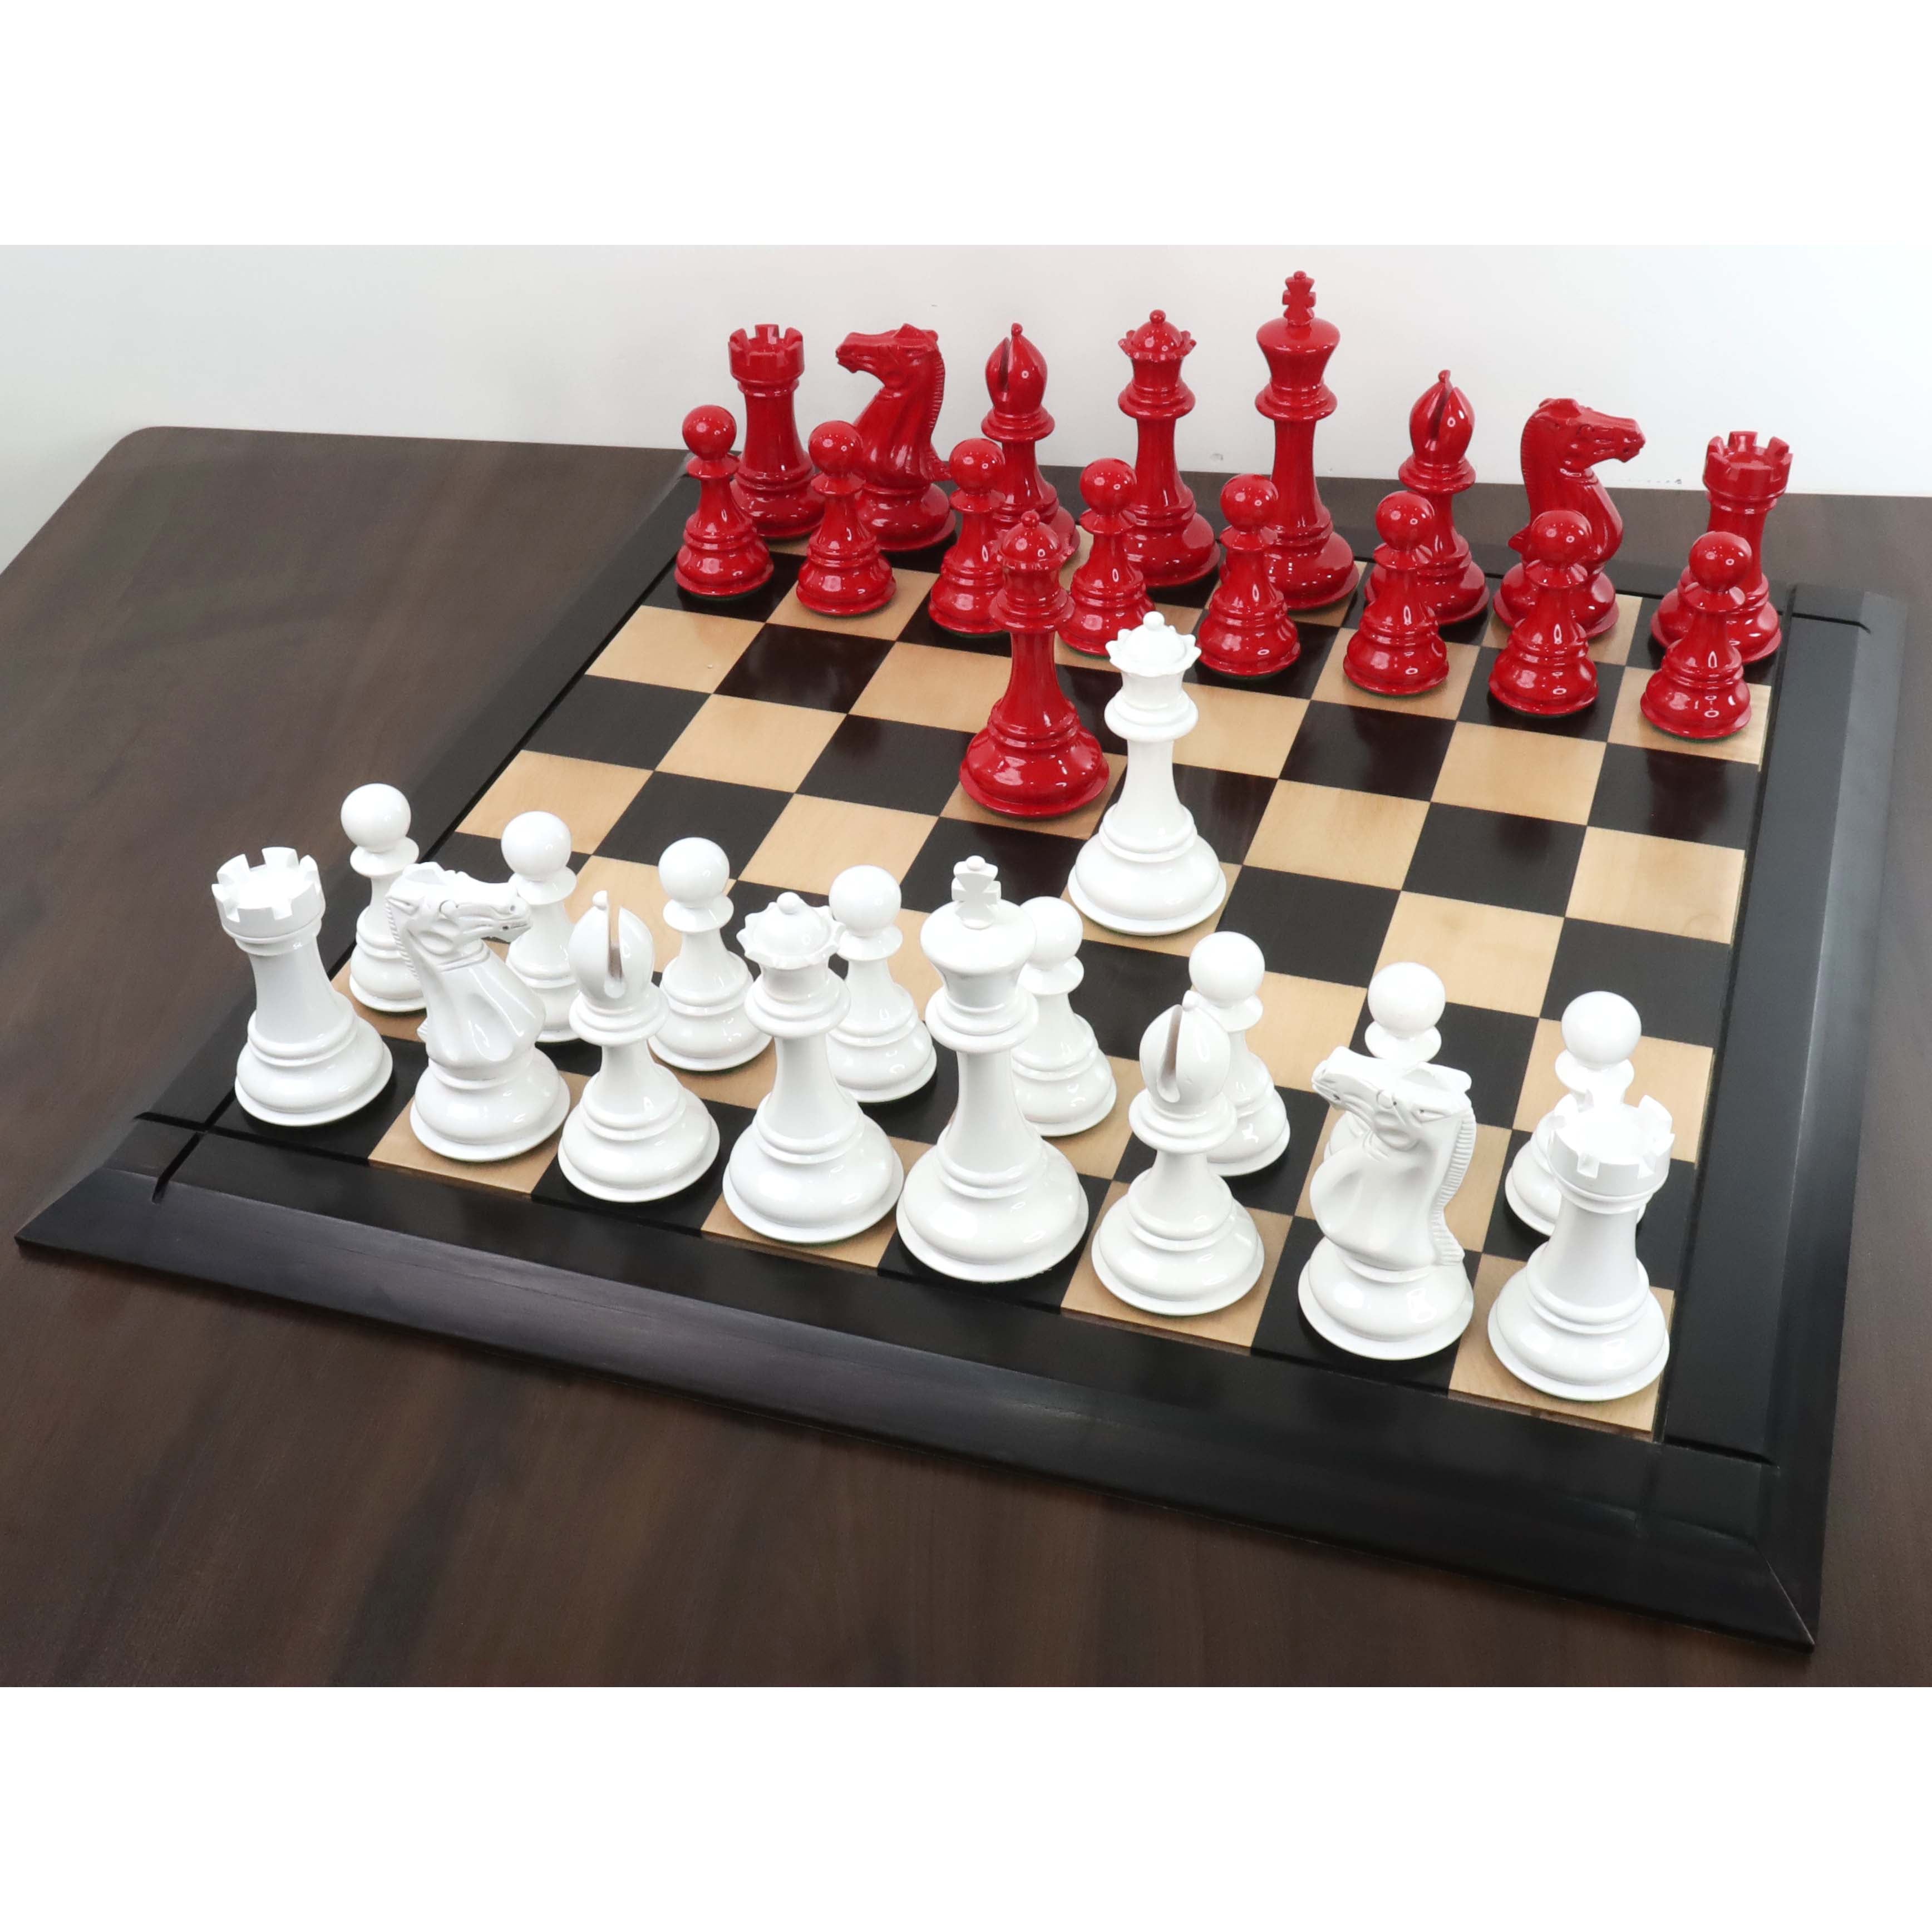 6.3" Jumbo Pro Staunton Luxury Chess Pieces Only Set - Red & White Lacquered